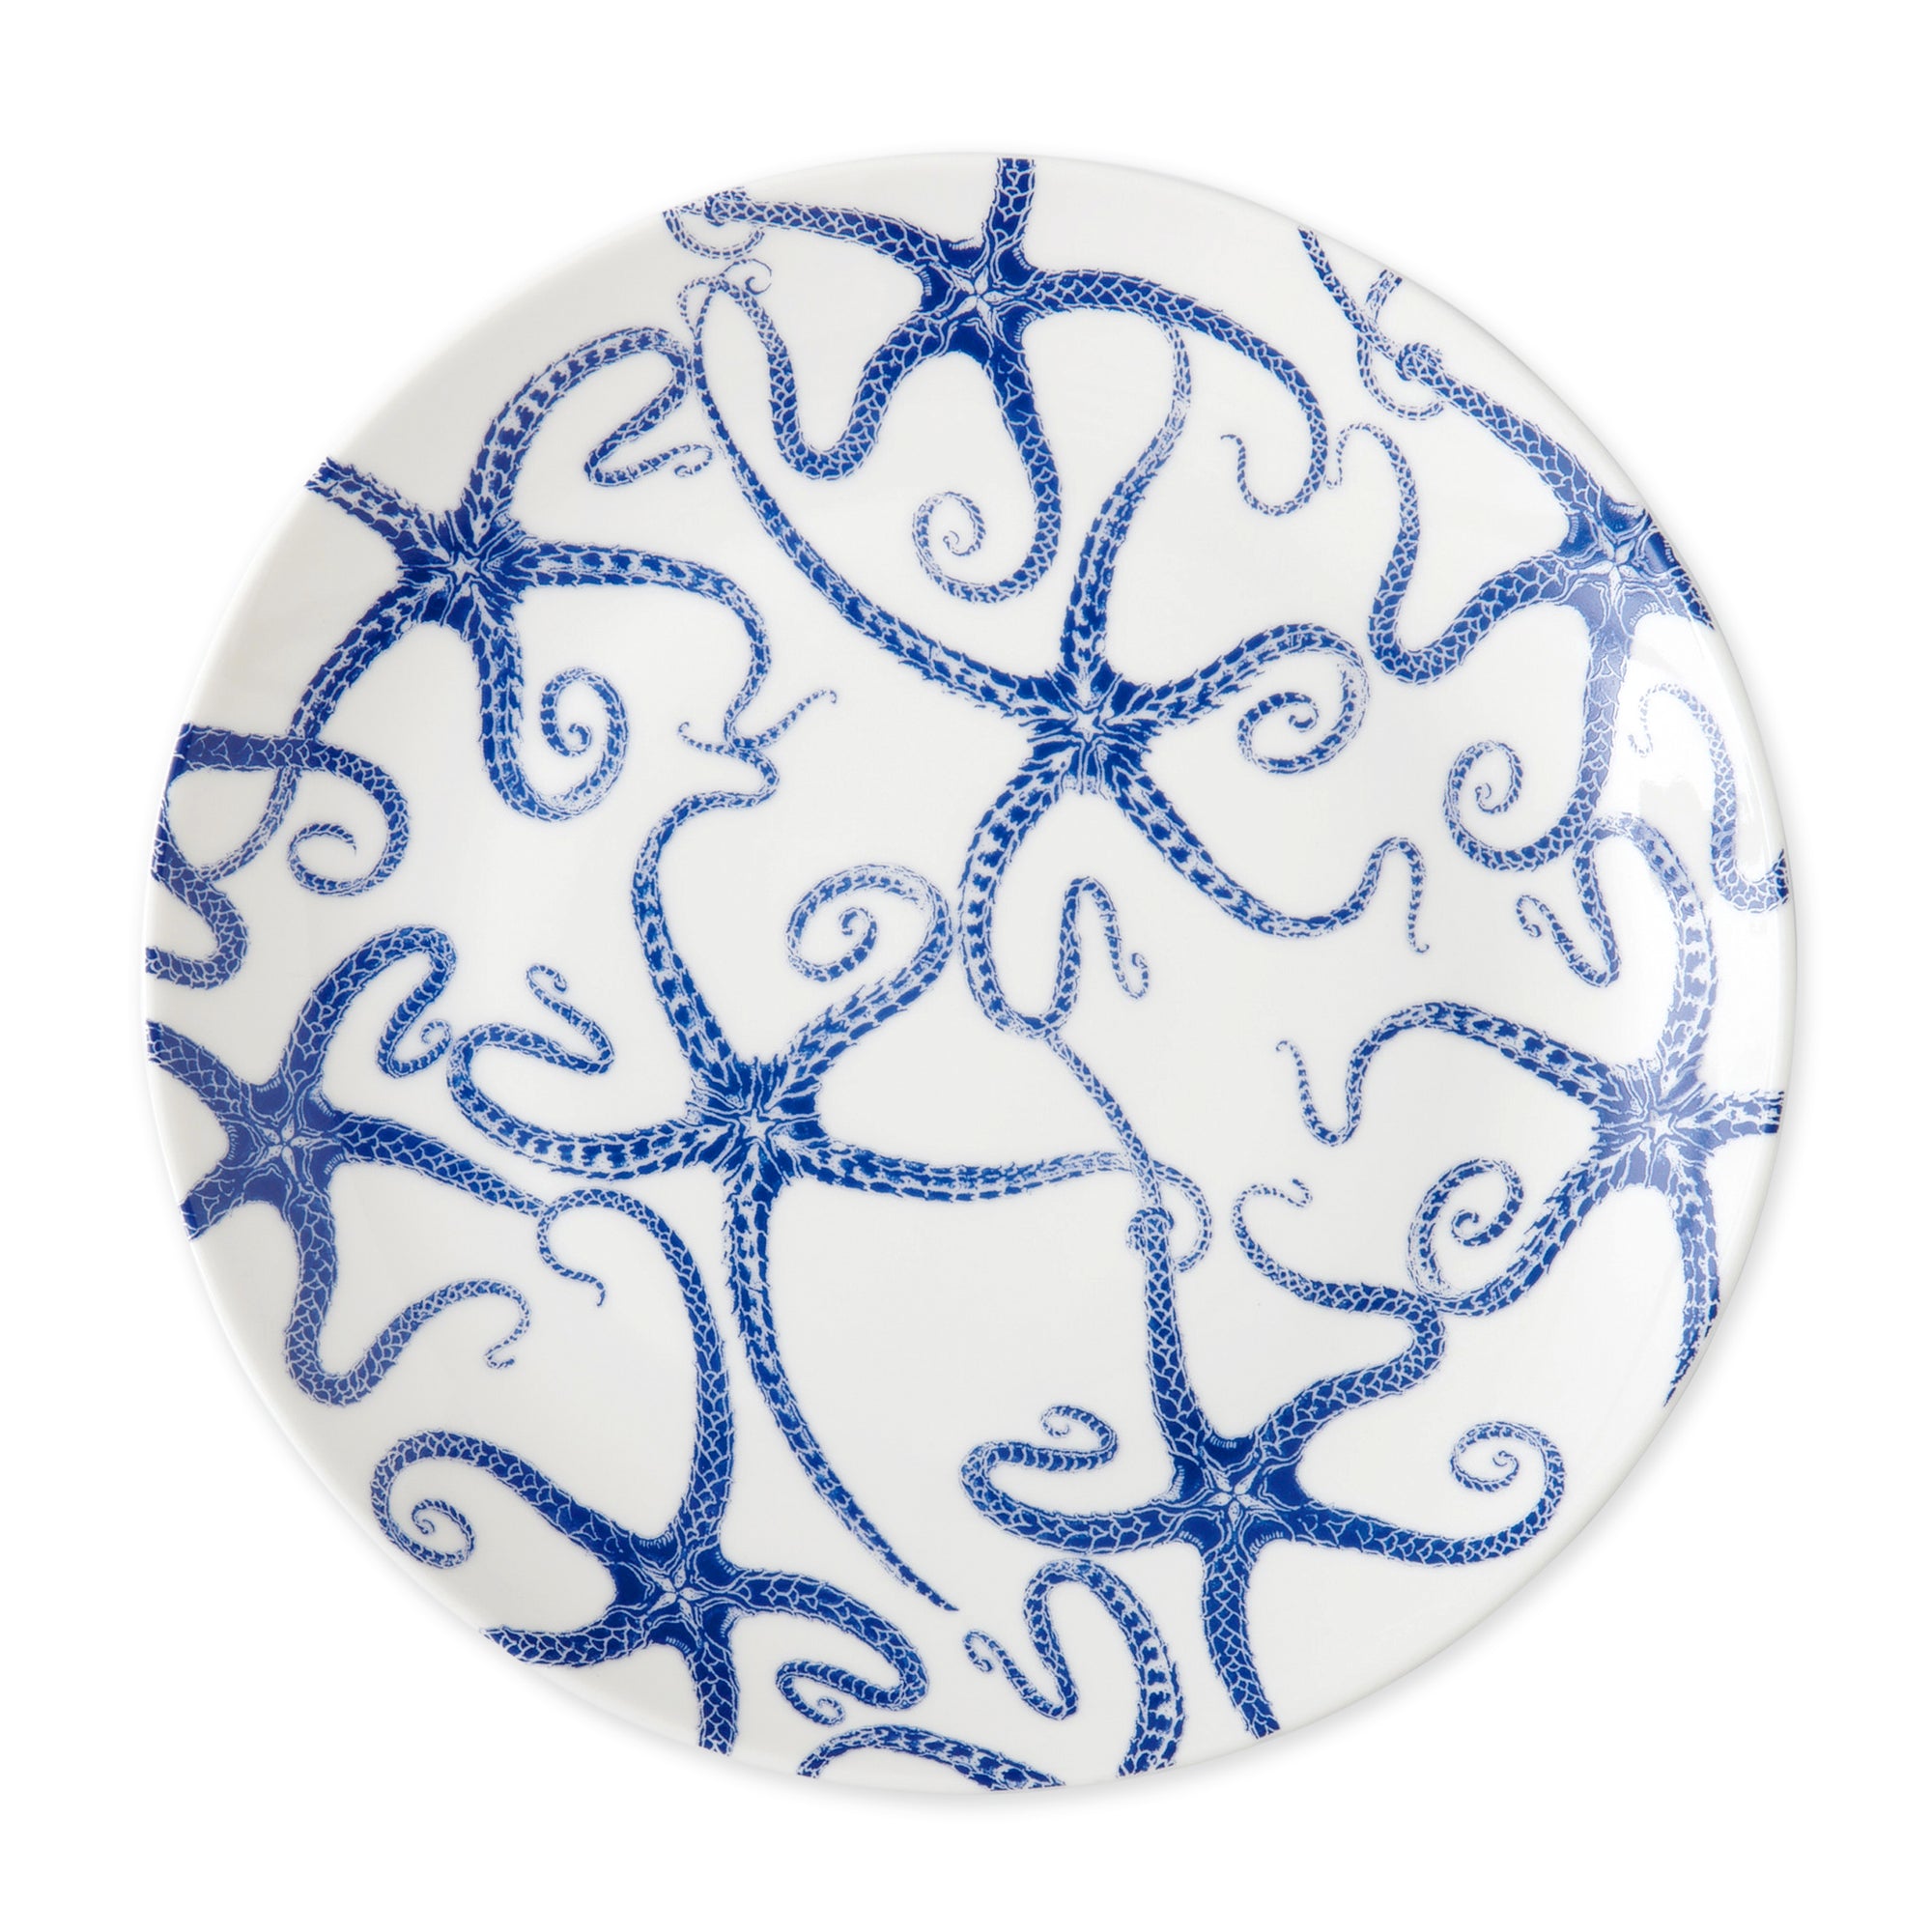 A Caskata Artisanal Home Starfish Coupe Dinner Plate featuring a contemporary shape and a pattern of blue octopus illustrations.